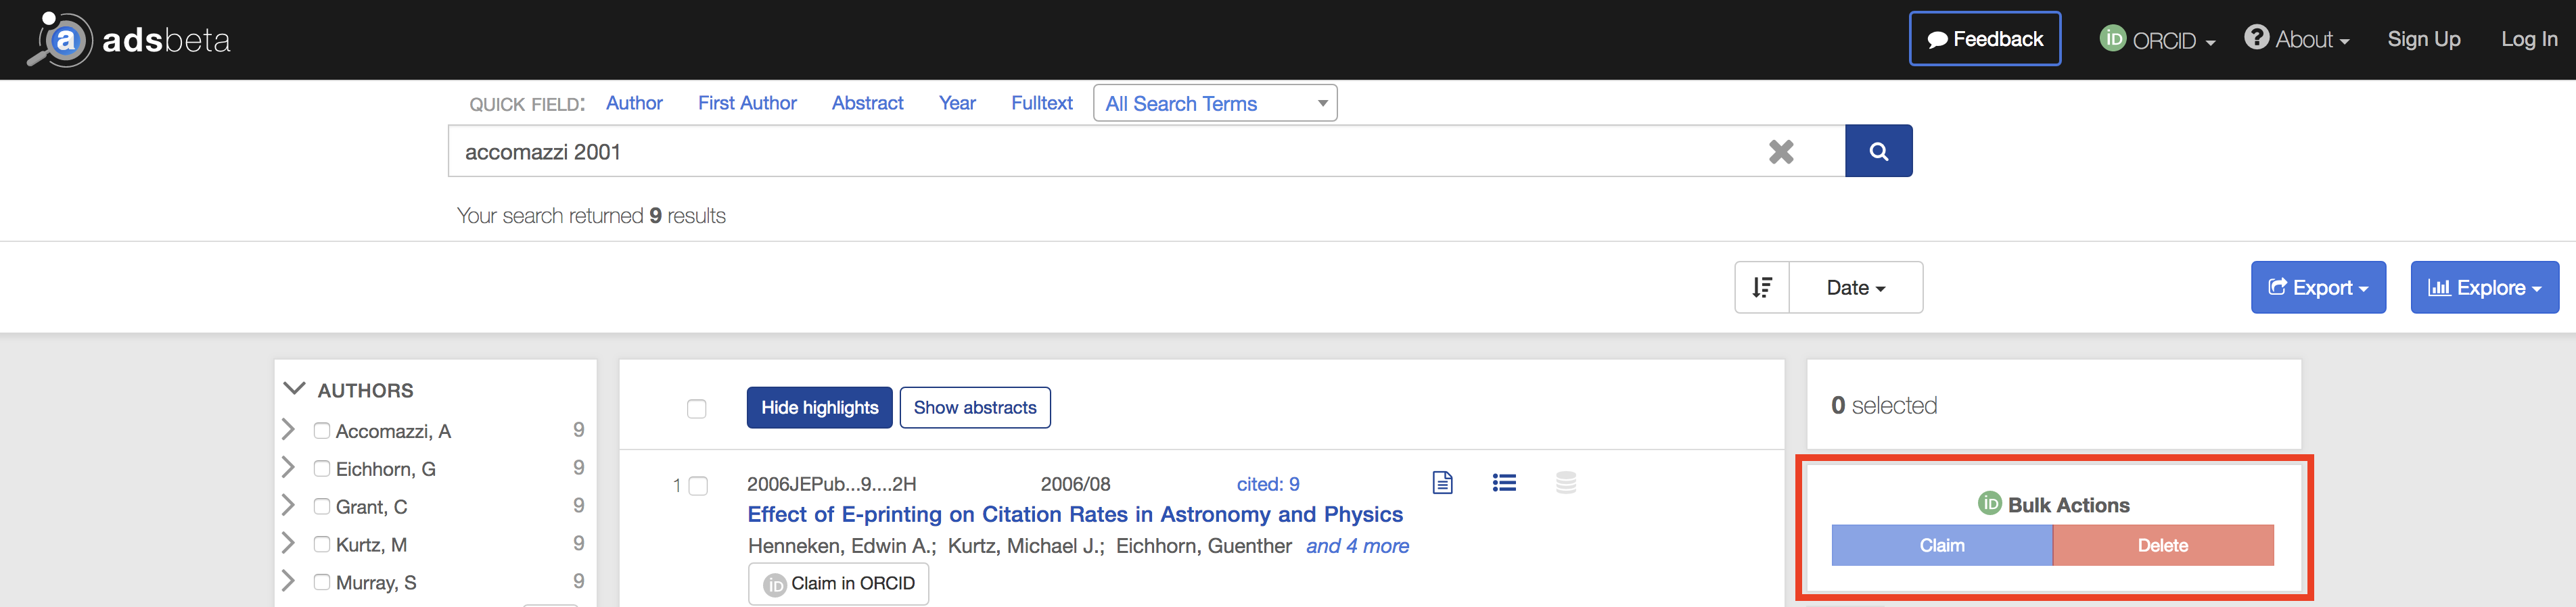 ORCID bulk action selection in the righthand column of the search results page